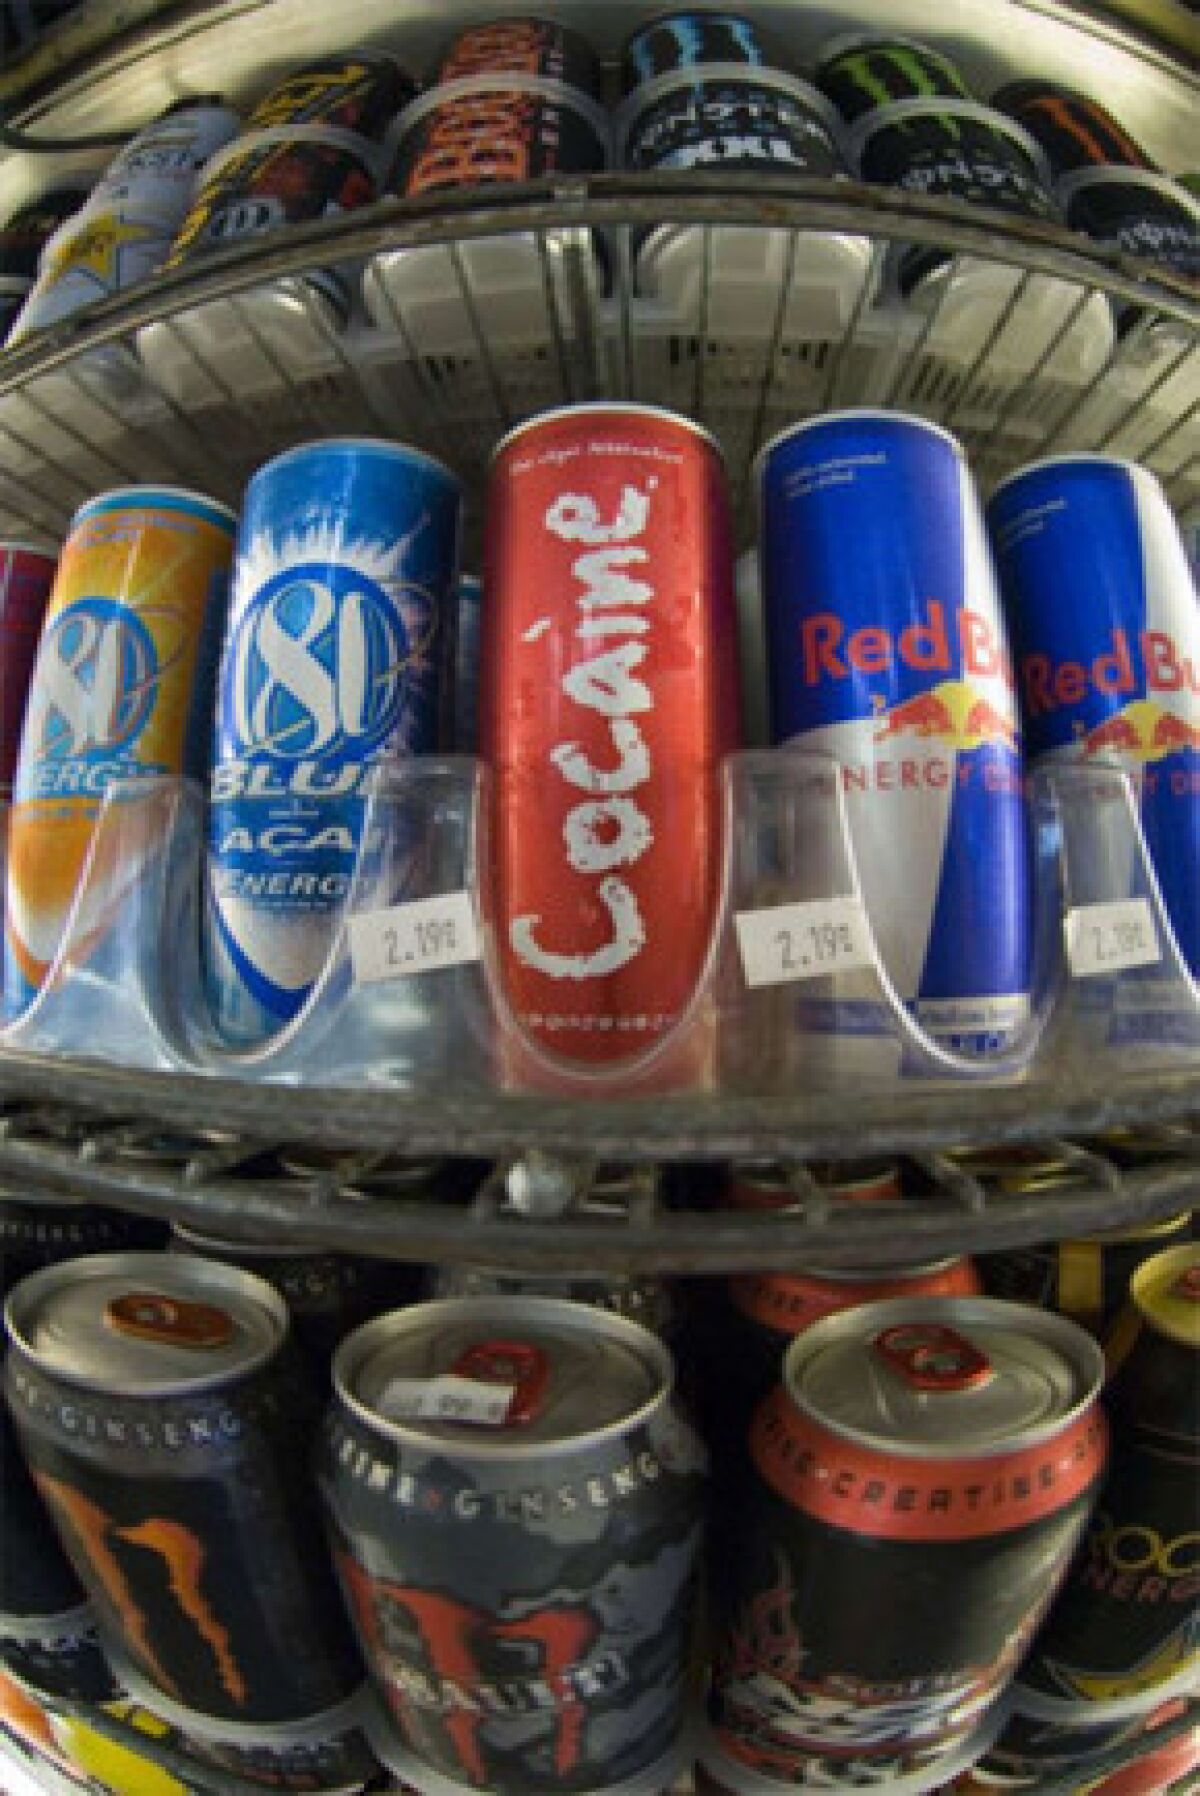 Radiologists used MRIs before and after consuming an energy drink to study changes of the heart.